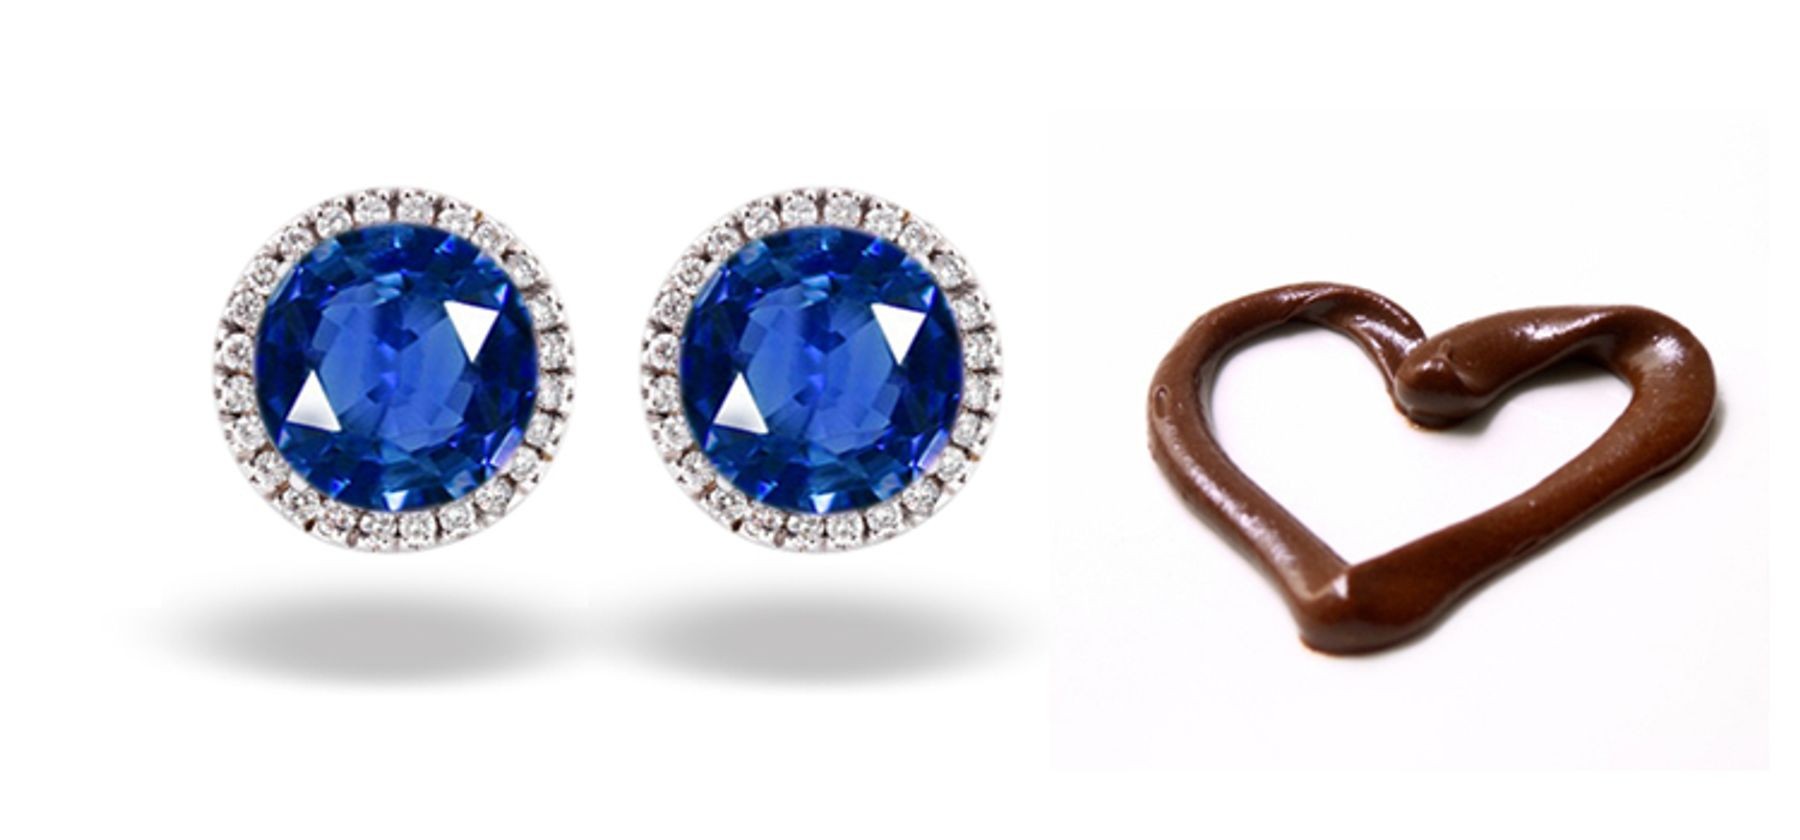 Recently Manufacture Designer Colored Gemstone Jewelry: Blue Sapphire & Diamond Studded Earrings